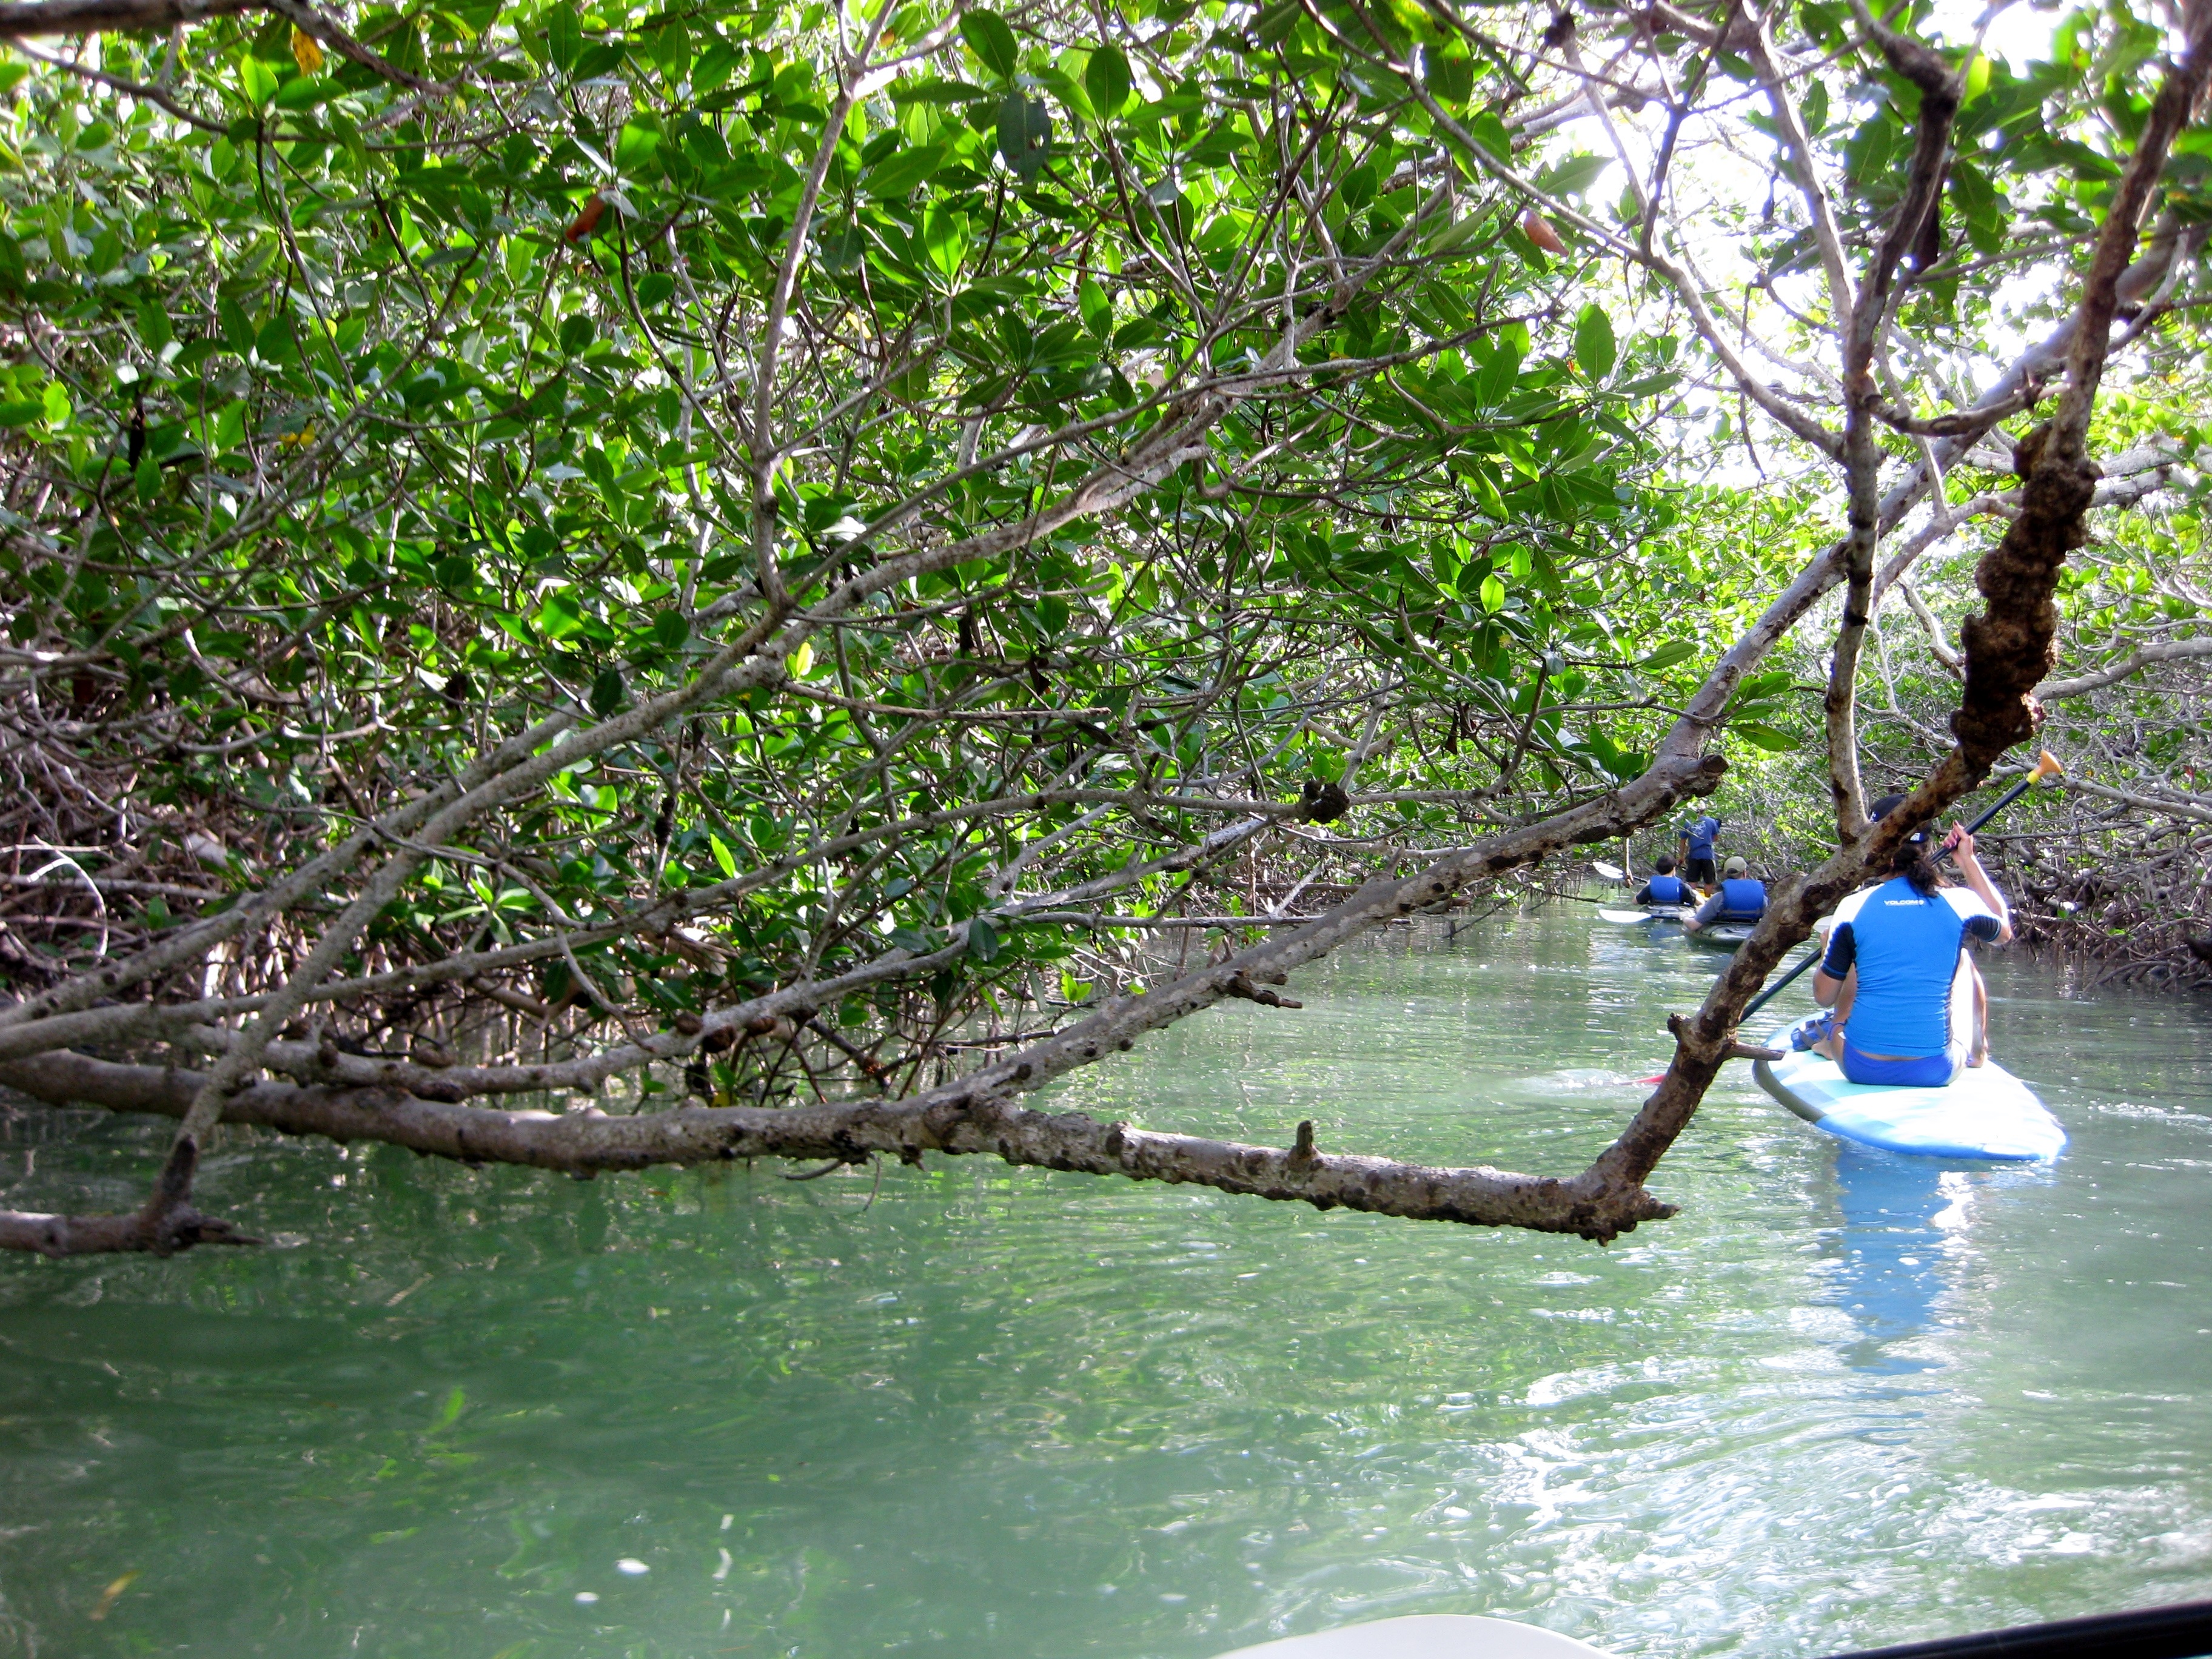 Following paddleboarders through the mangroves.